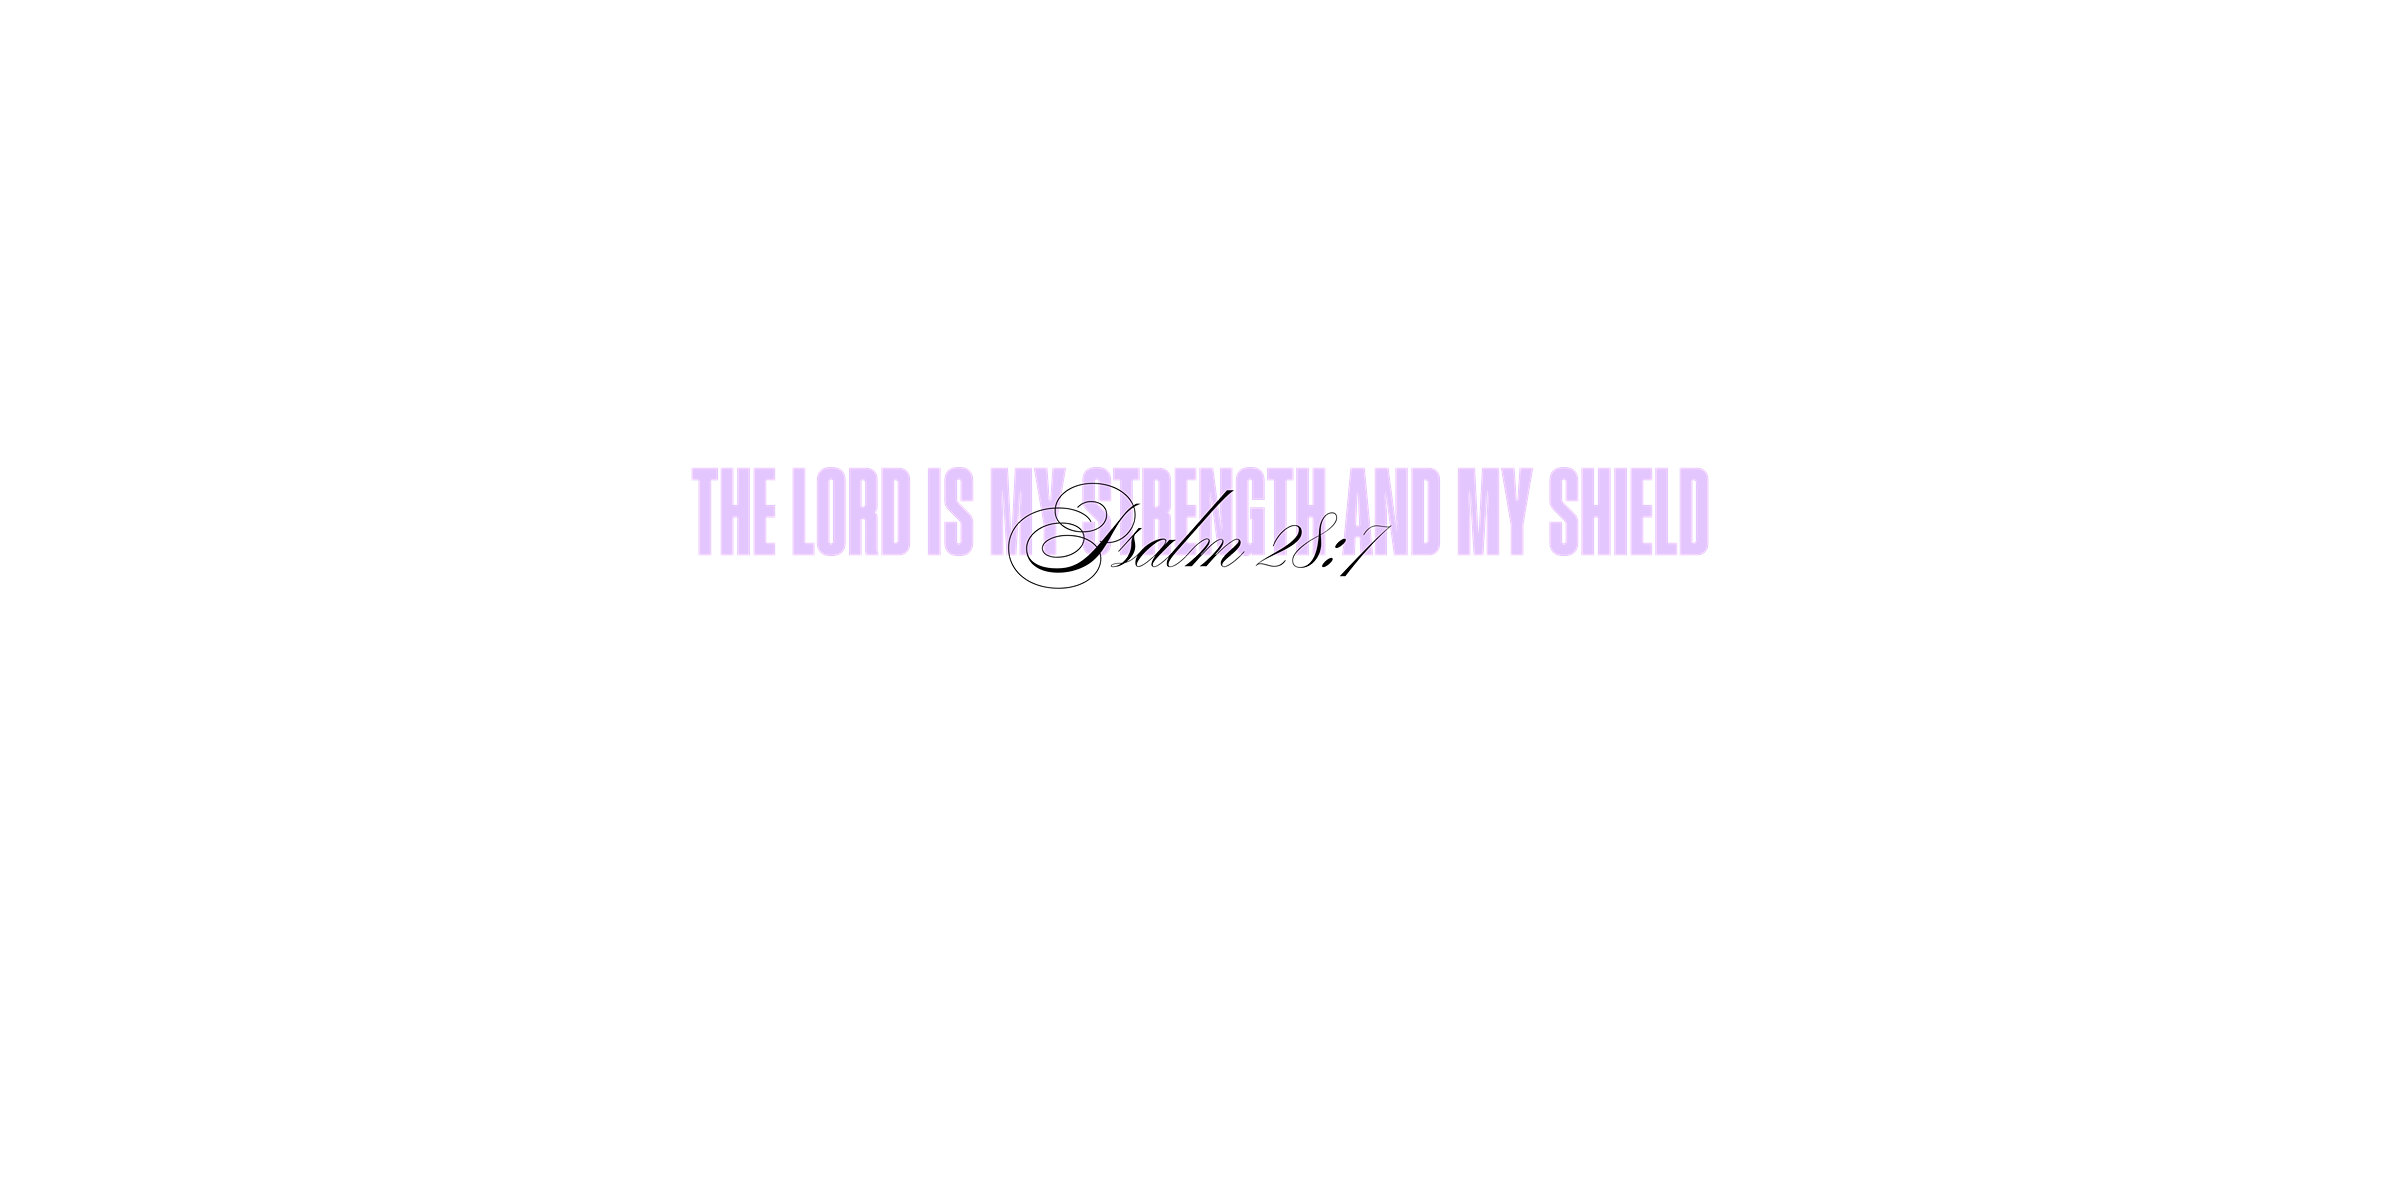 Psalm 28:7 - The Lord is my strength and my shield